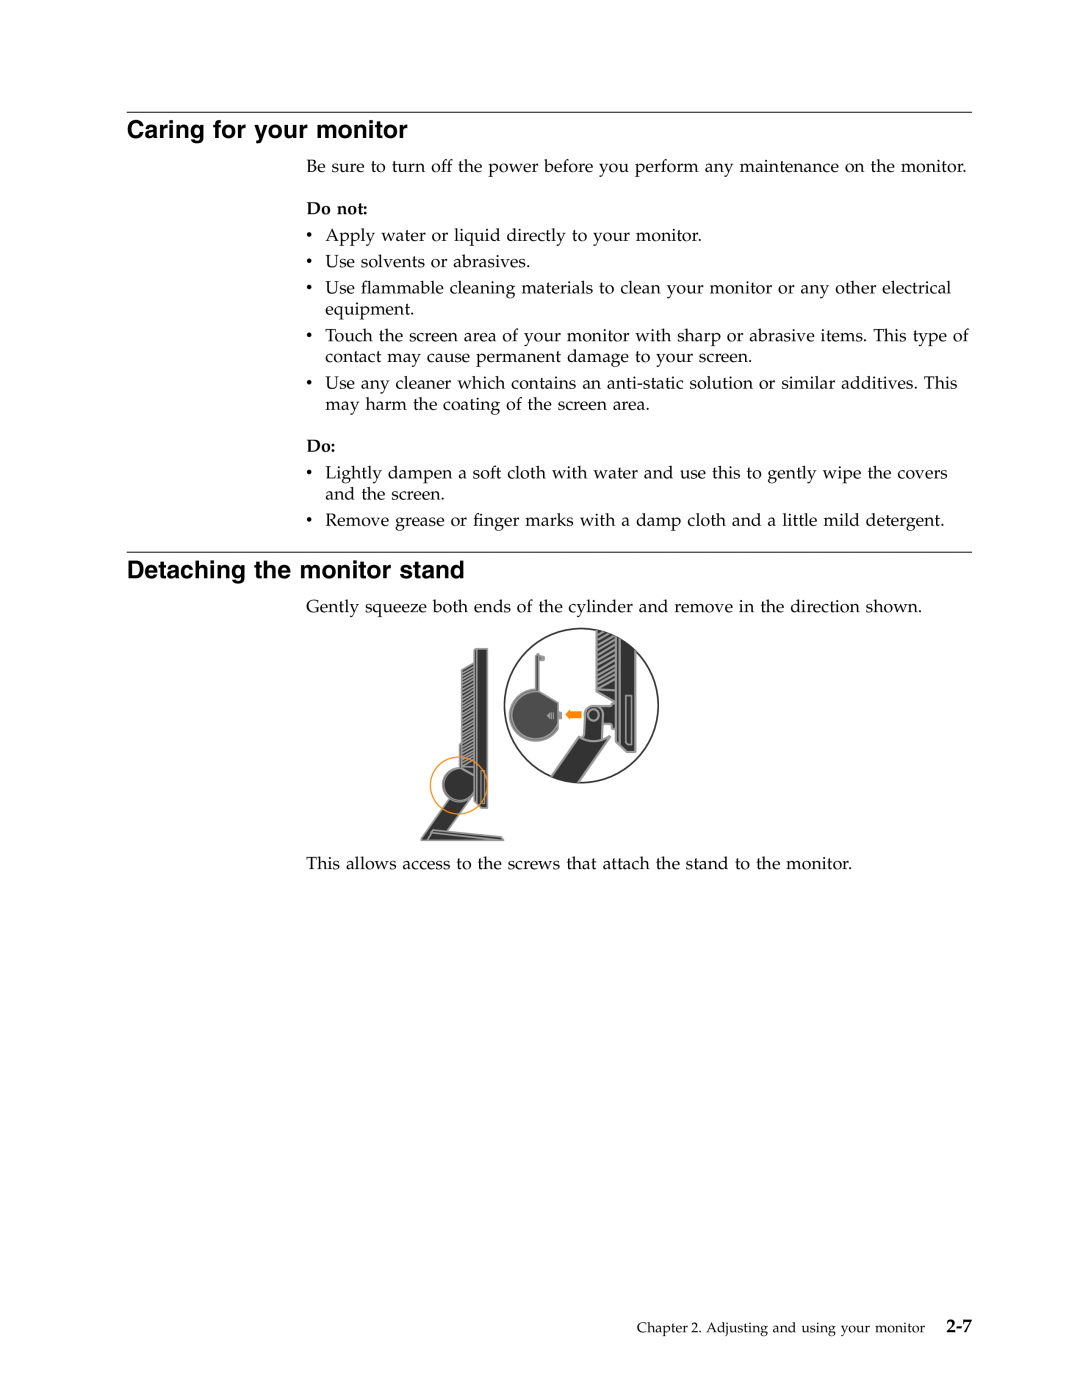 Lenovo L191 manual Caring for your monitor, Detaching the monitor stand, Do not 